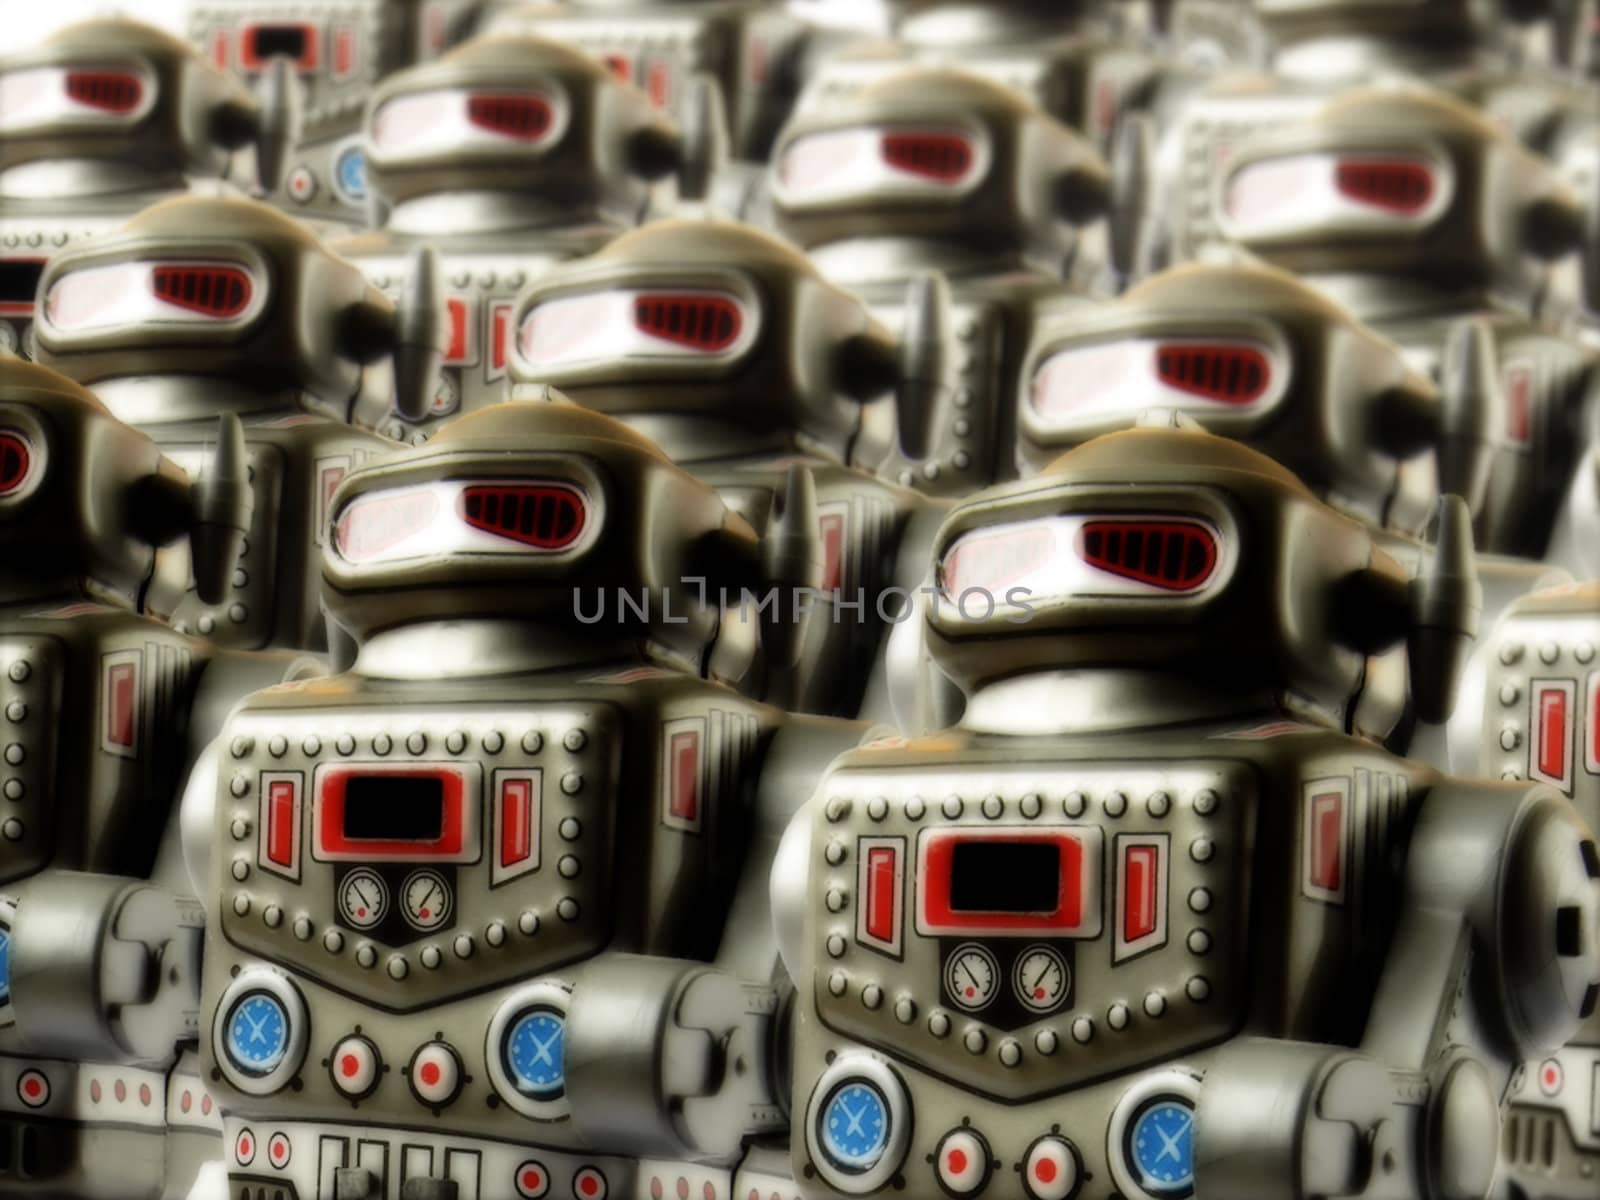 army of vintage toy clockwork robots; differential focus and sinister lighting
